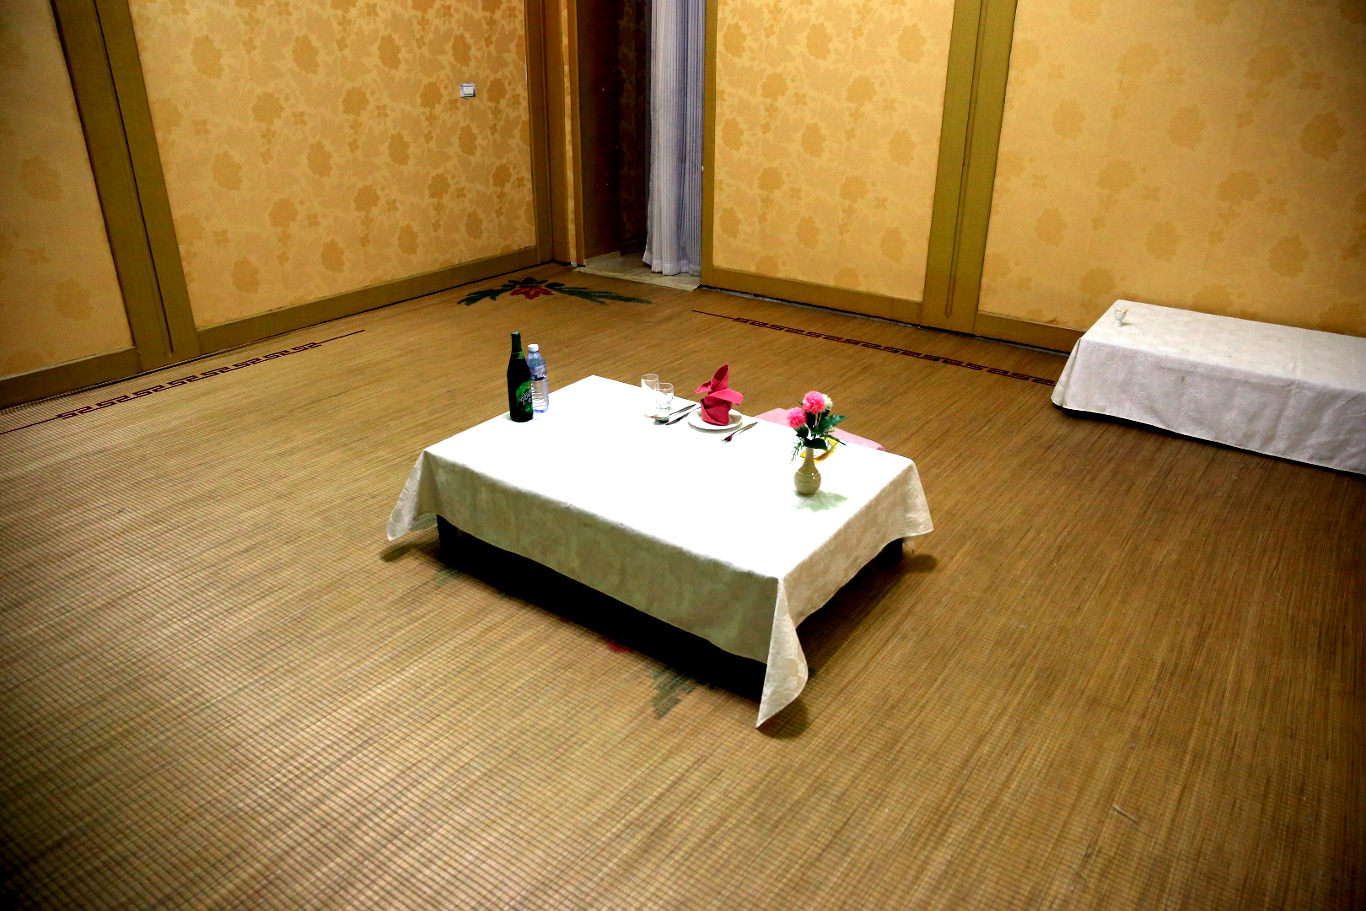 Dinner setting at the Kaesong Folk Hotel in North Korea aka Kaesong Minsok Hotel. We eat and sleep on the floor at this Korean traditional hotel. Trip arranged by KTG Tours